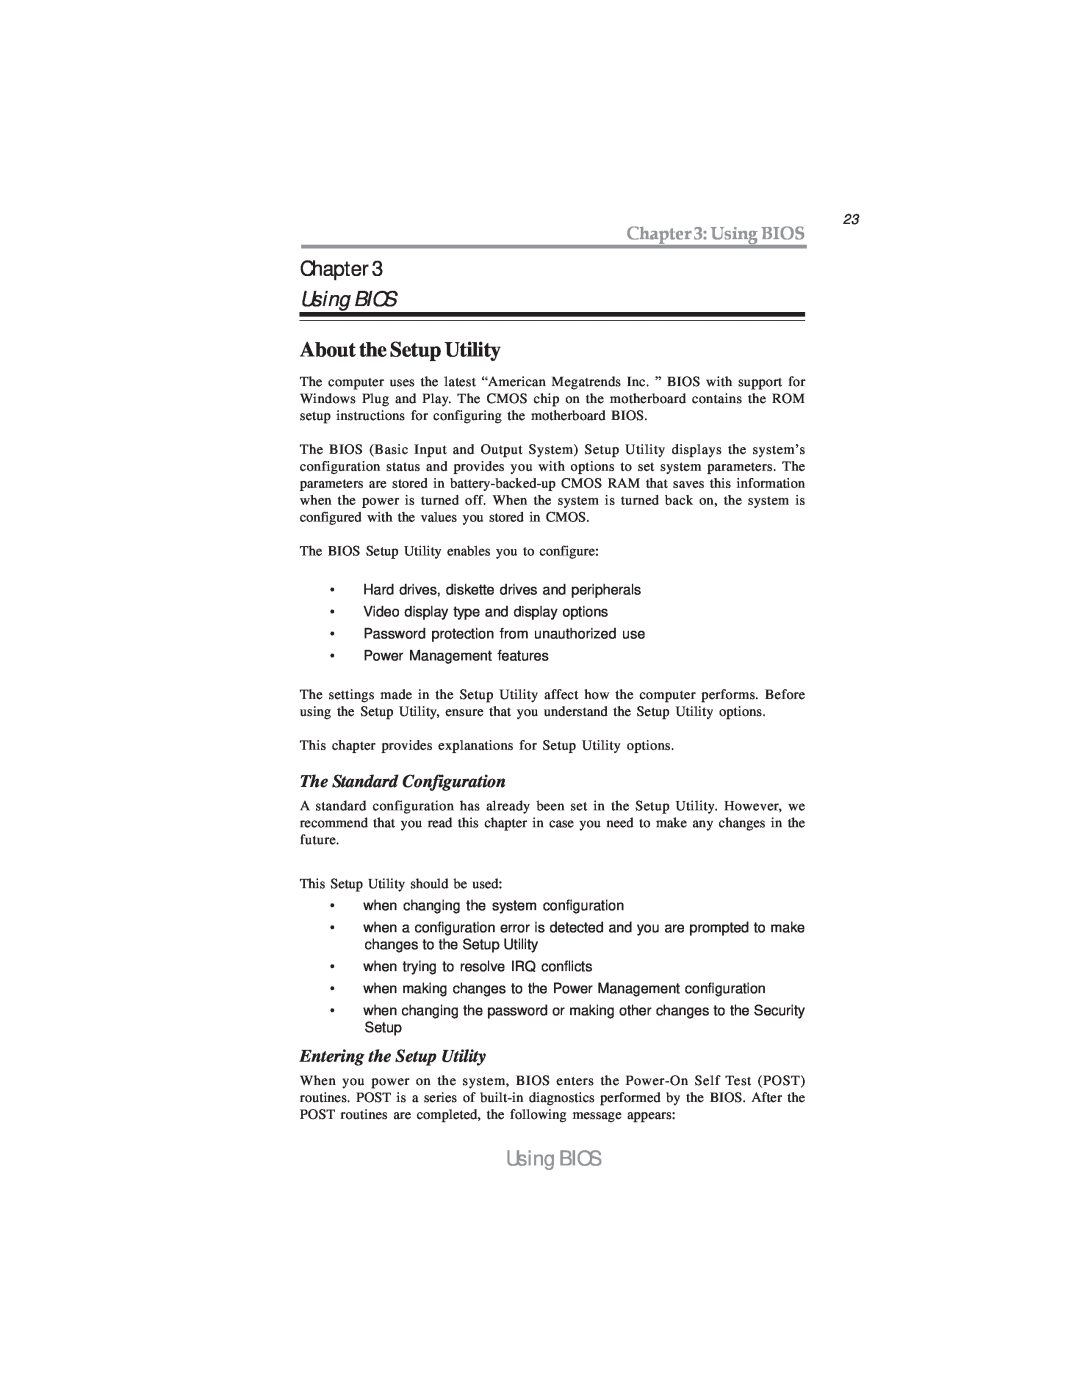 Microsoft PXP43 manual Using BIOS, About the Setup Utility, The Standard Configuration, Entering the Setup Utility, Chapter 